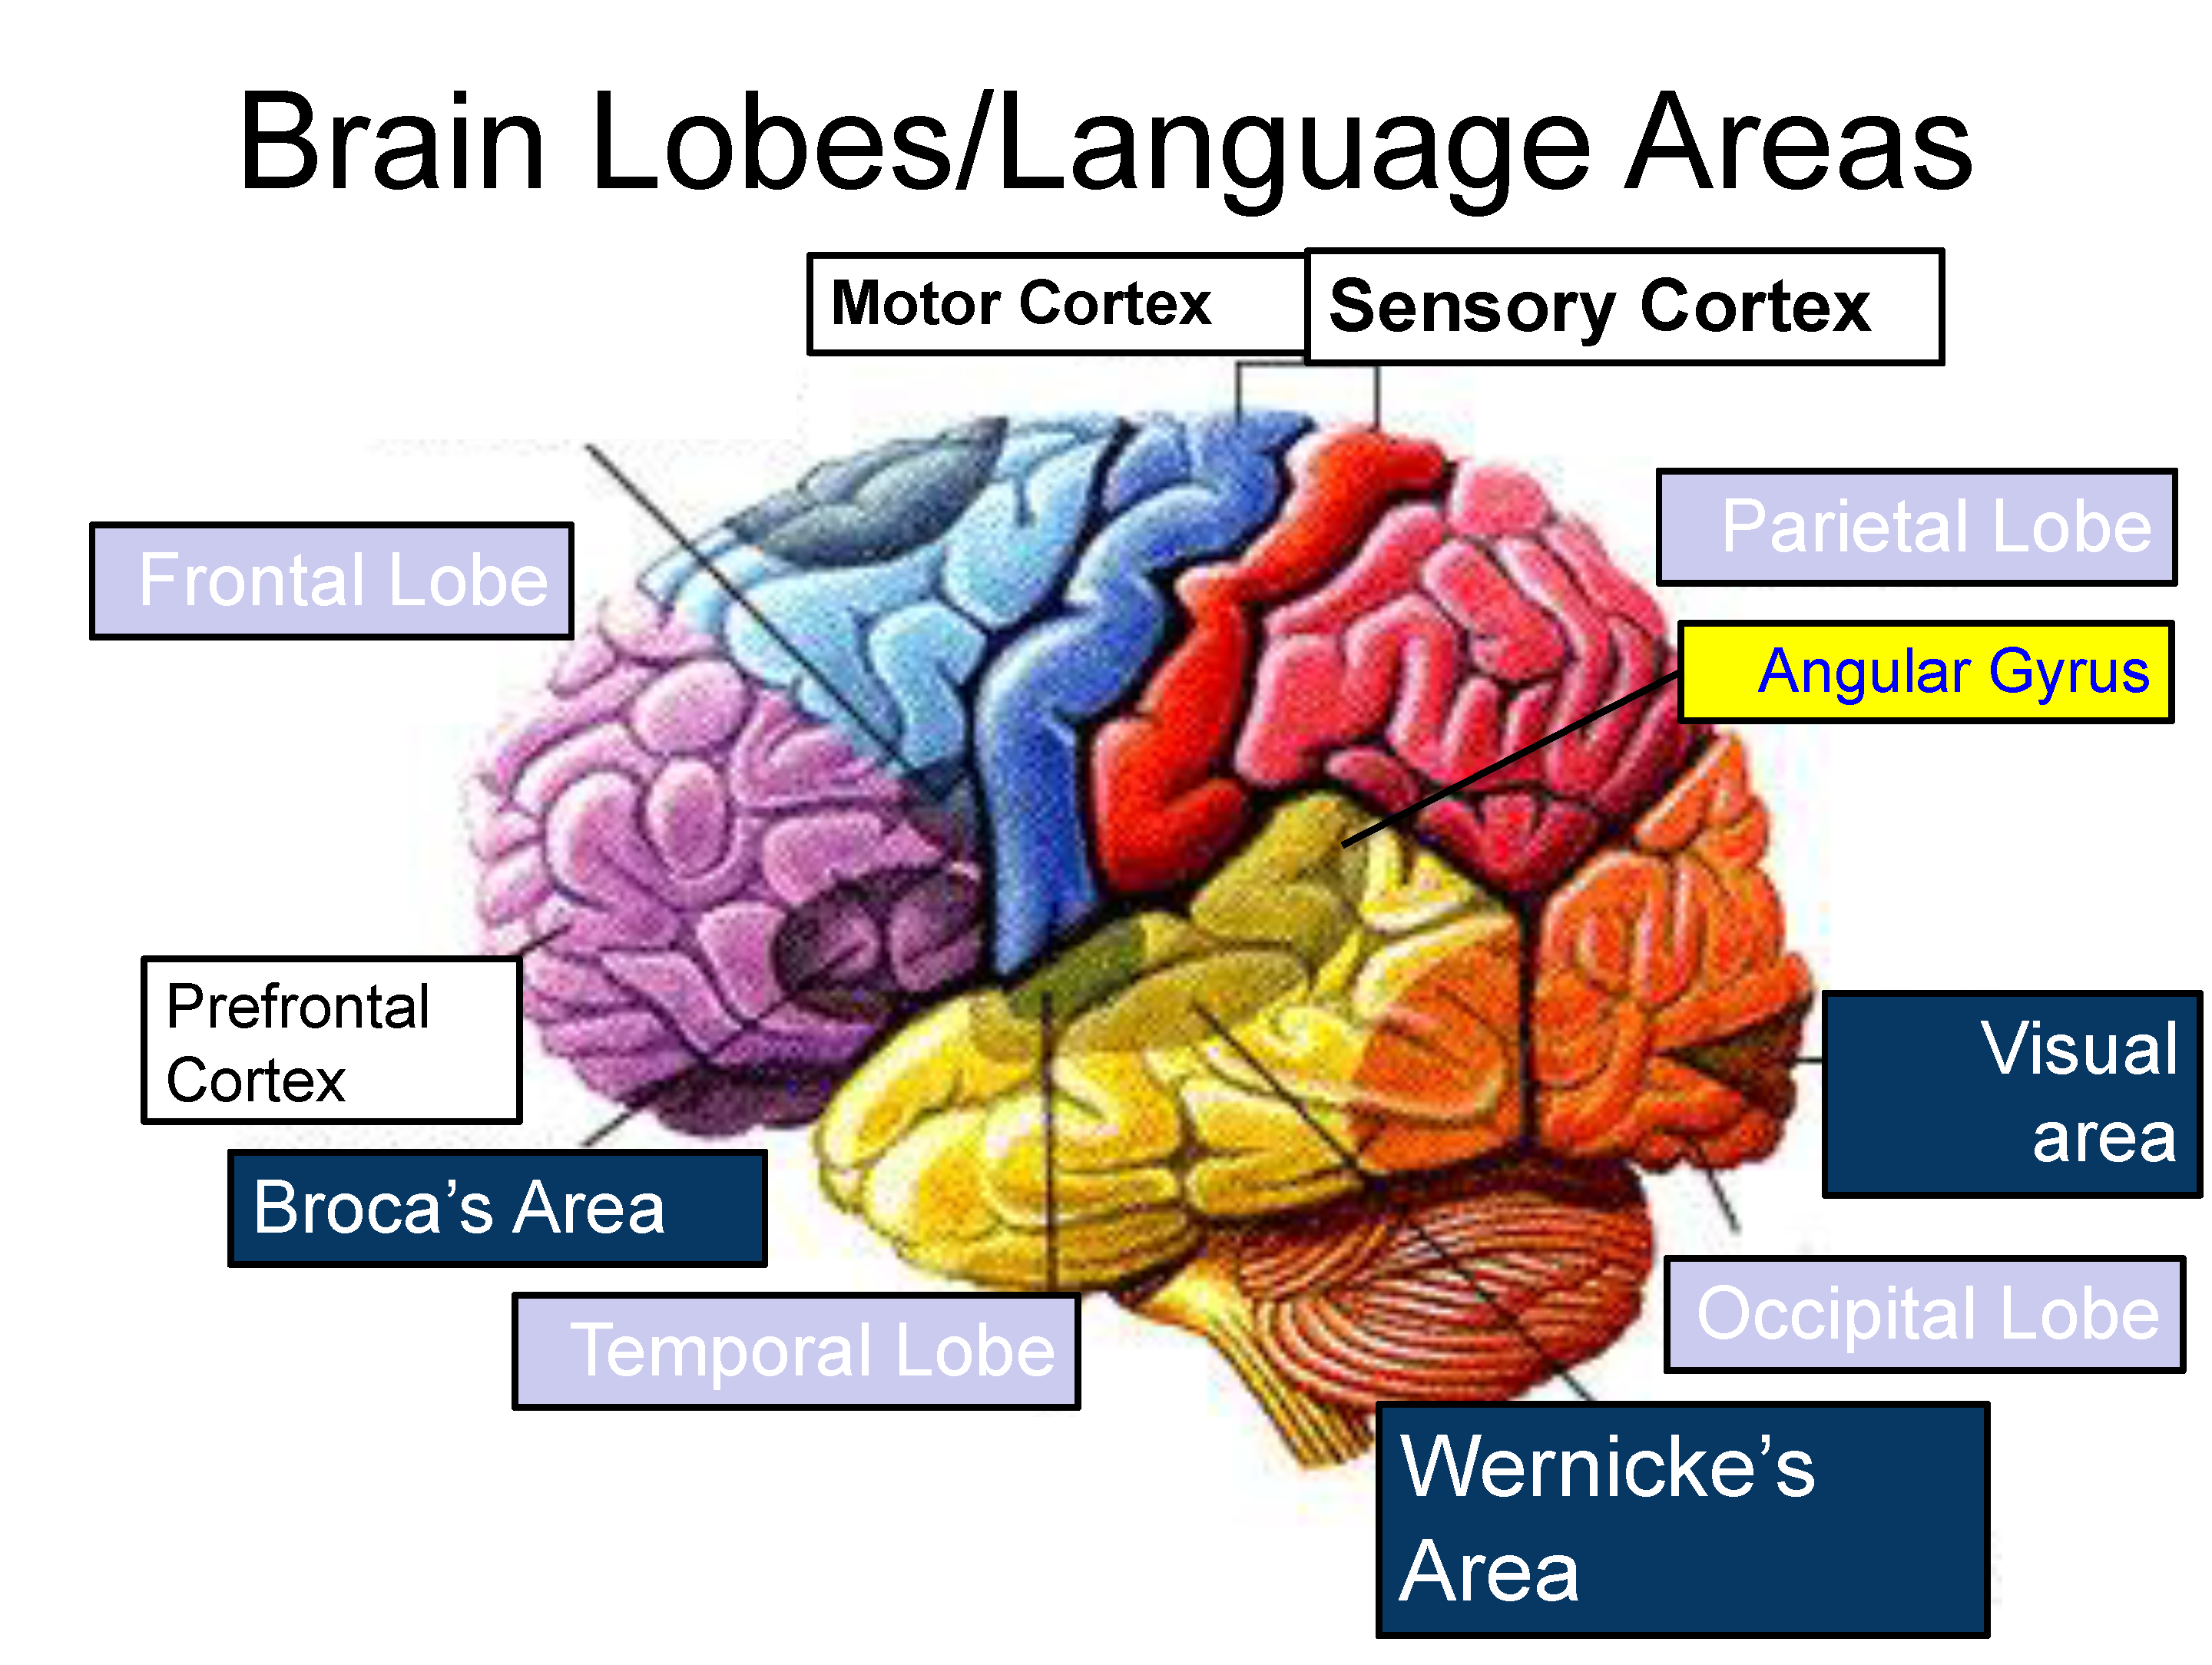 <ul><li><p>area at the front of the parietal lobes that registers and processes body touch and movement sensations</p></li><li><p>receives information from skin surface and sense organs</p></li></ul>